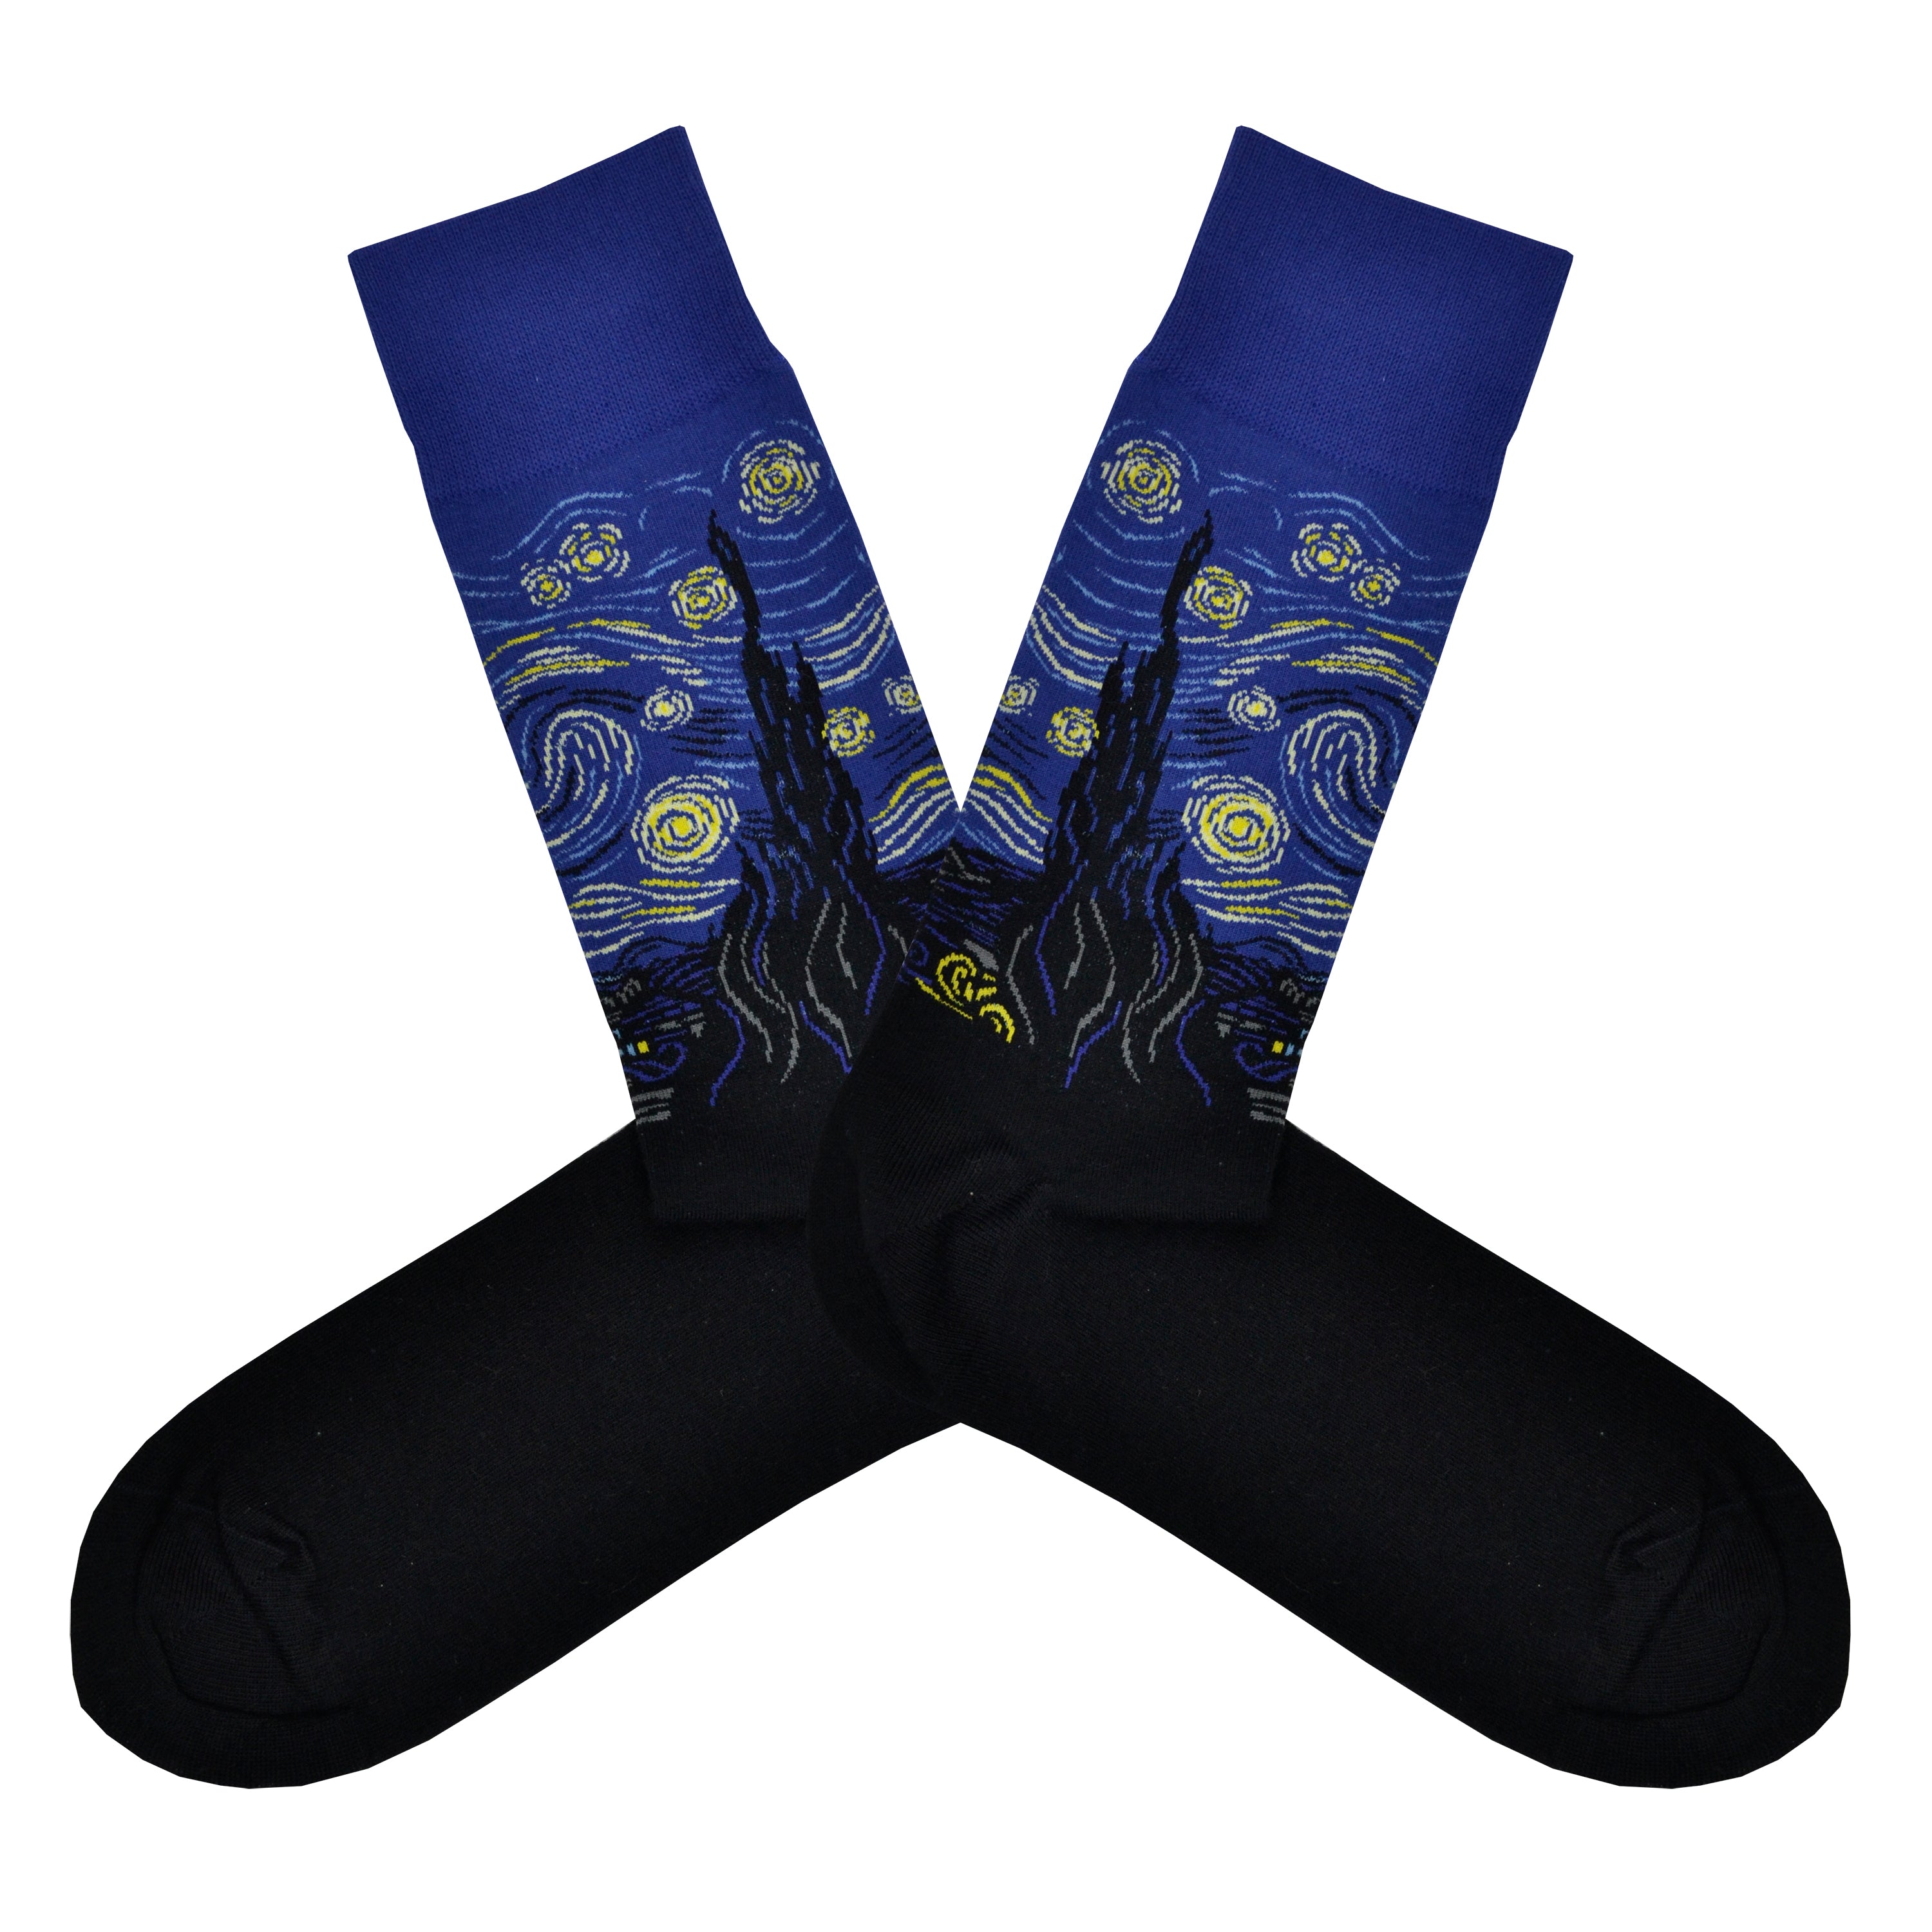 These navy blue cotton men's crew socks by the brand Hot Sox feature the famous 